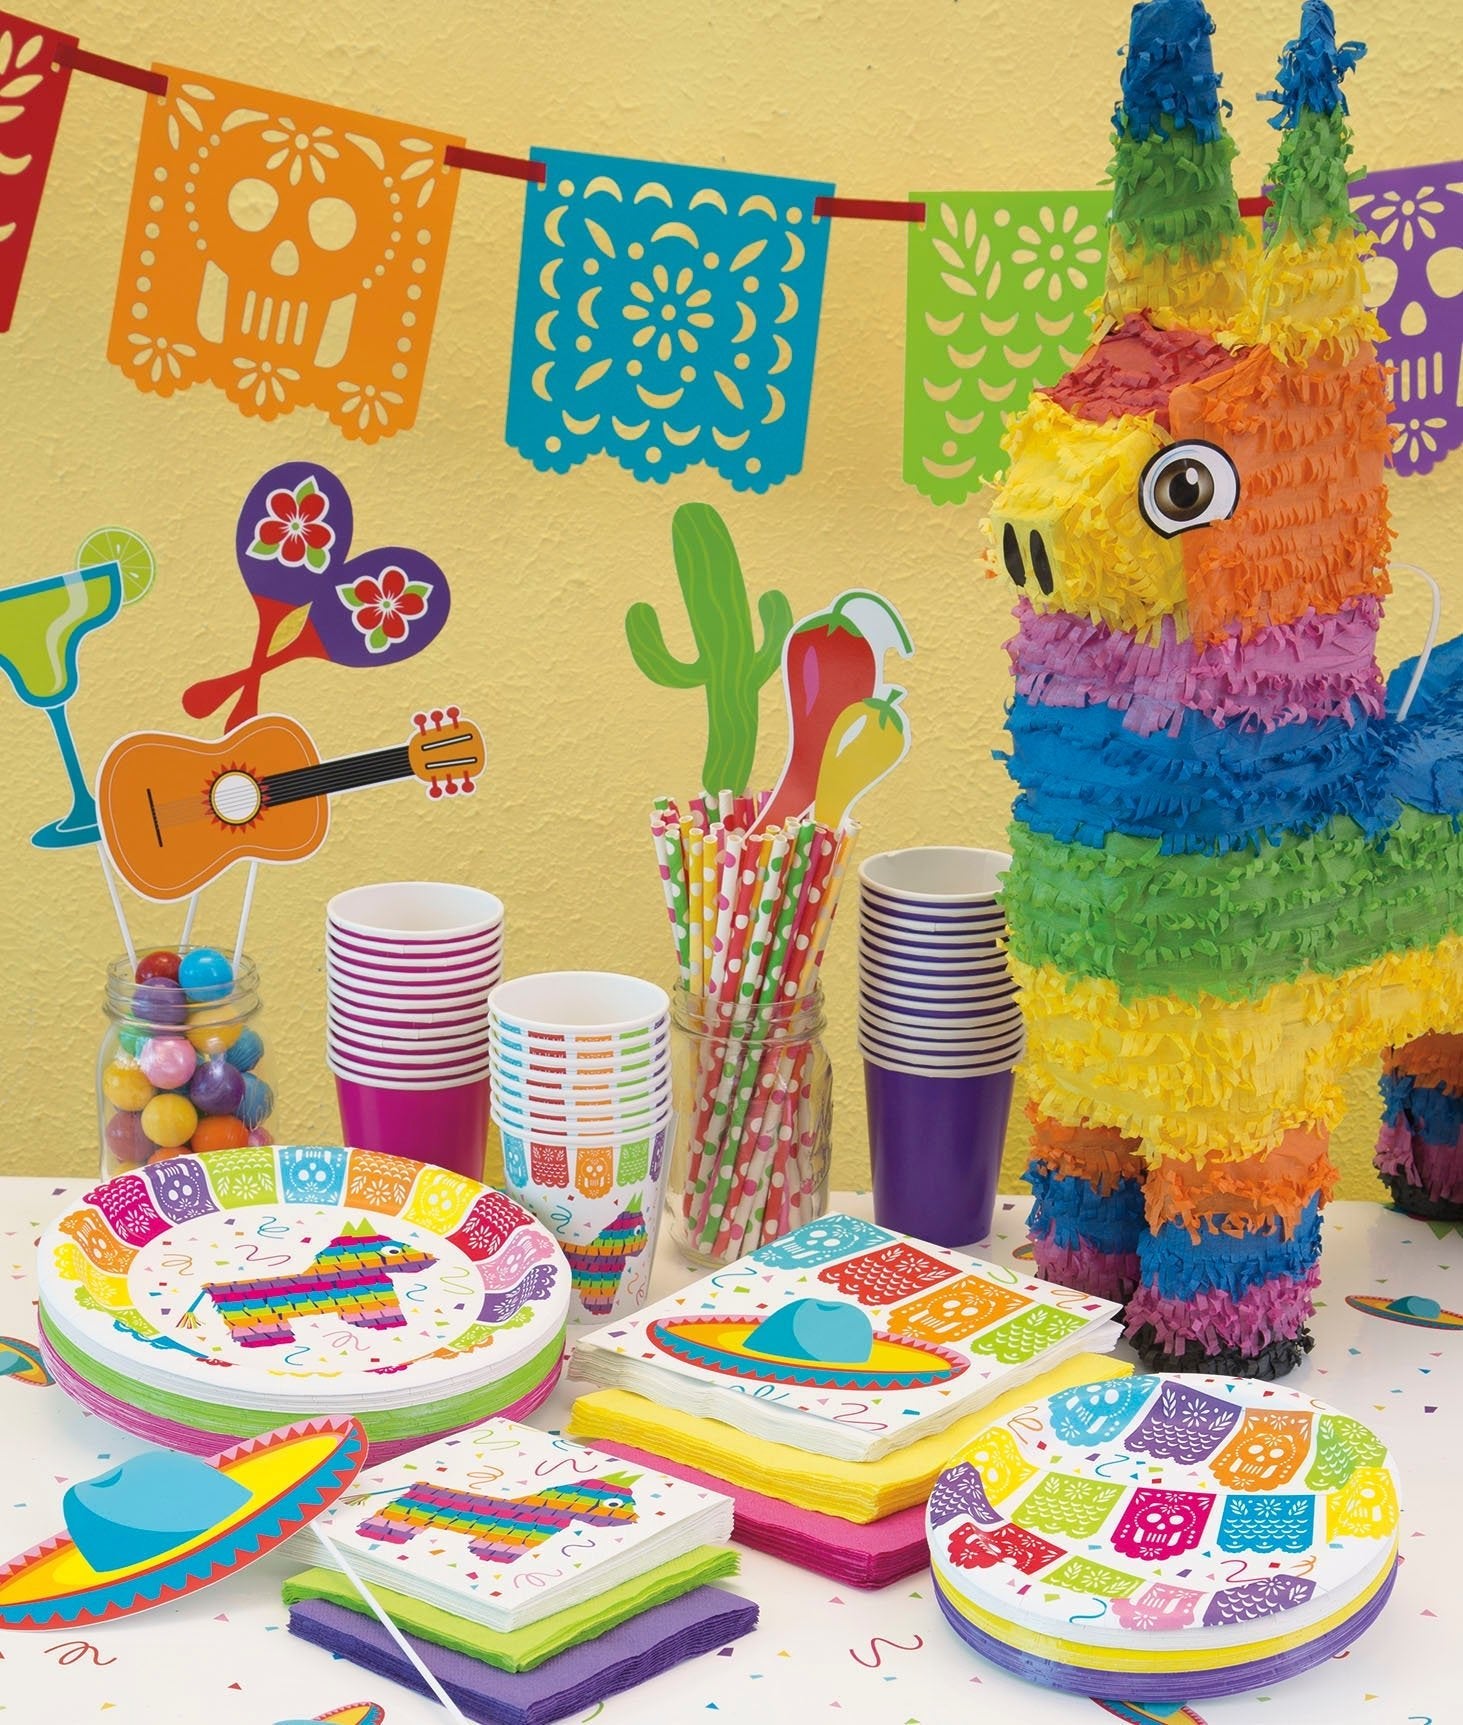 Fiesta Cactus Party Cups with Lids & Straws - Stesha Party - Boy Baby  Shower, cinco de mayo, cup